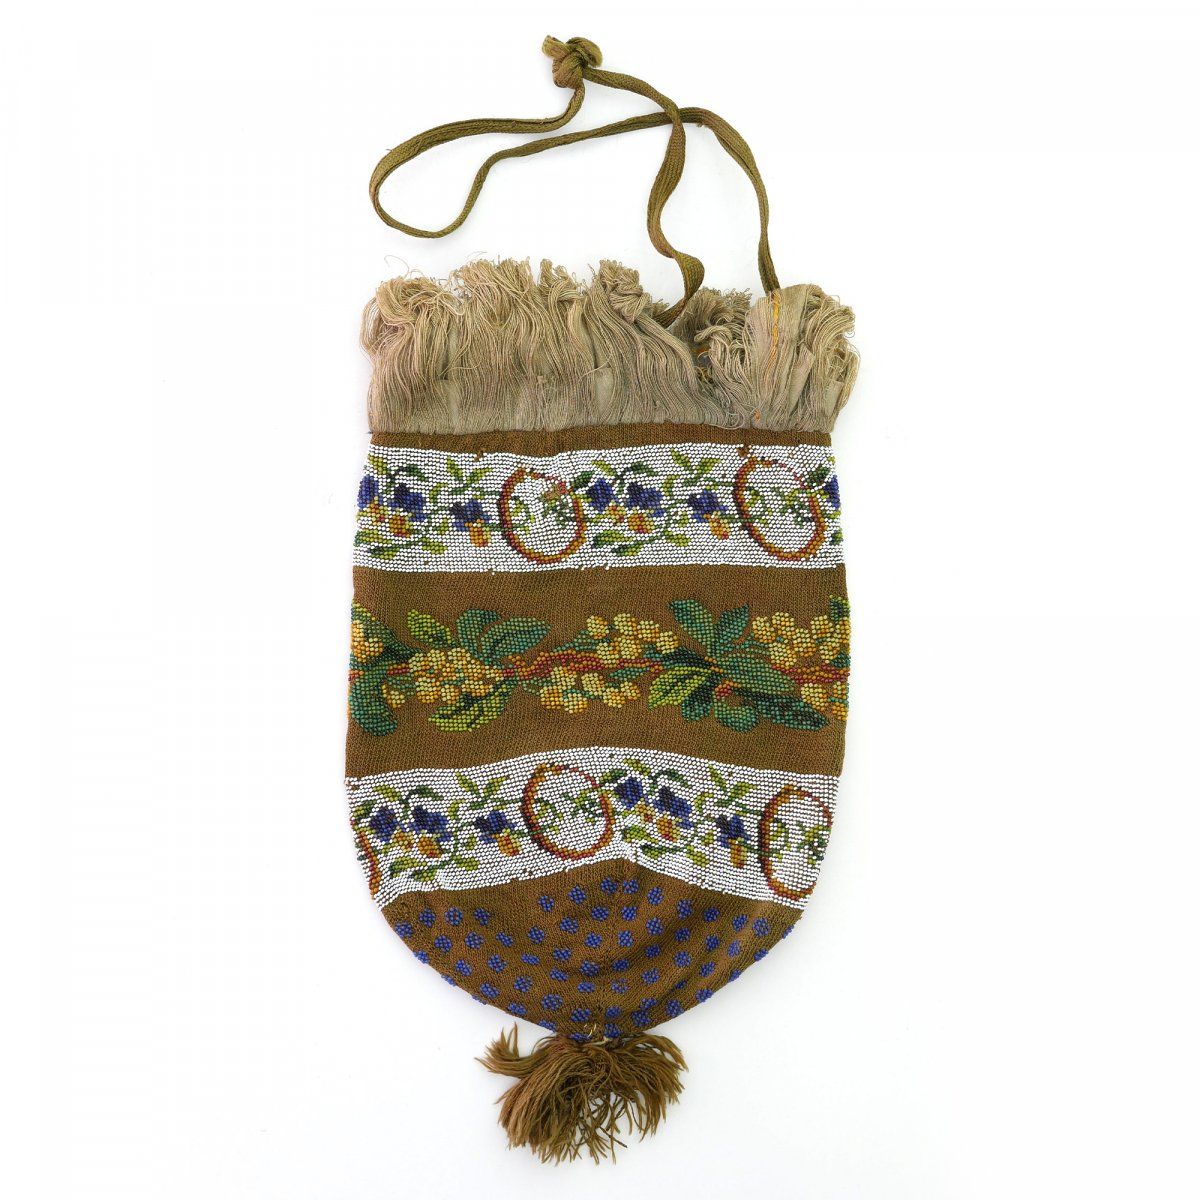 Null Pouch with floral borders, c. 1830, H. 25 x 14 cm. Knitted, with polychrome&hellip;